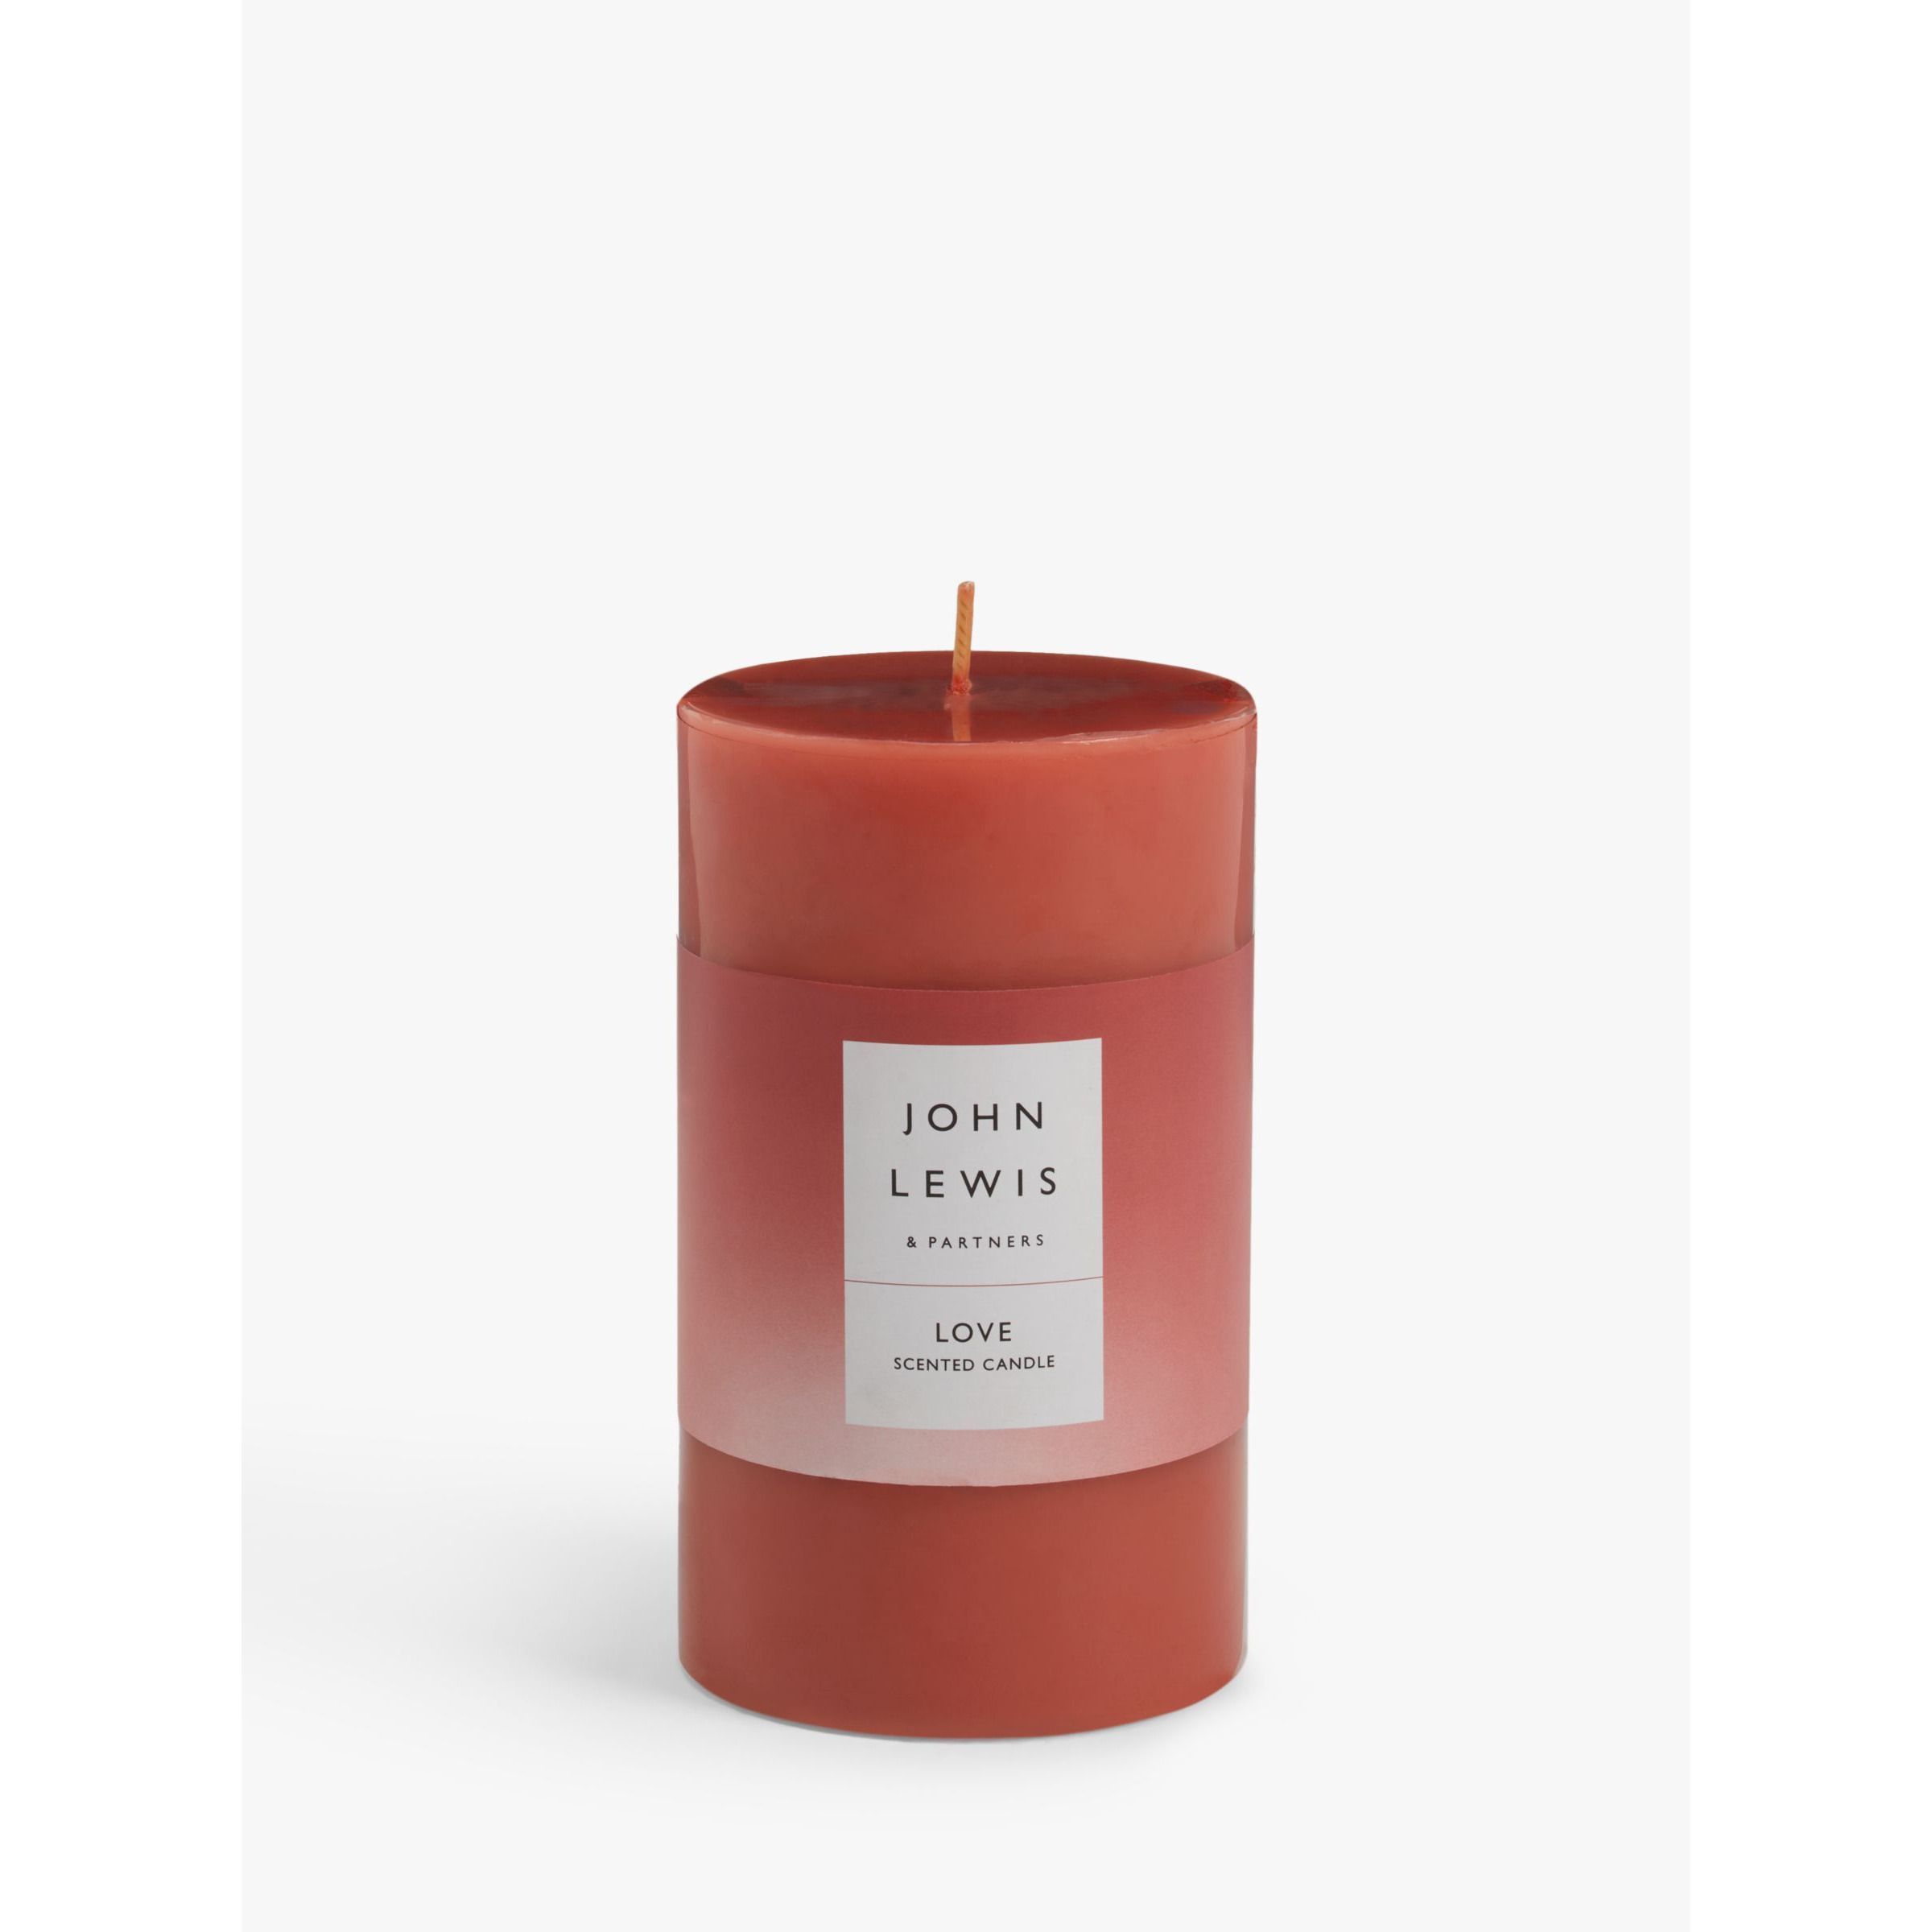 John Lewis Sentiments Love Pillar Scented Candle, 507g - image 1